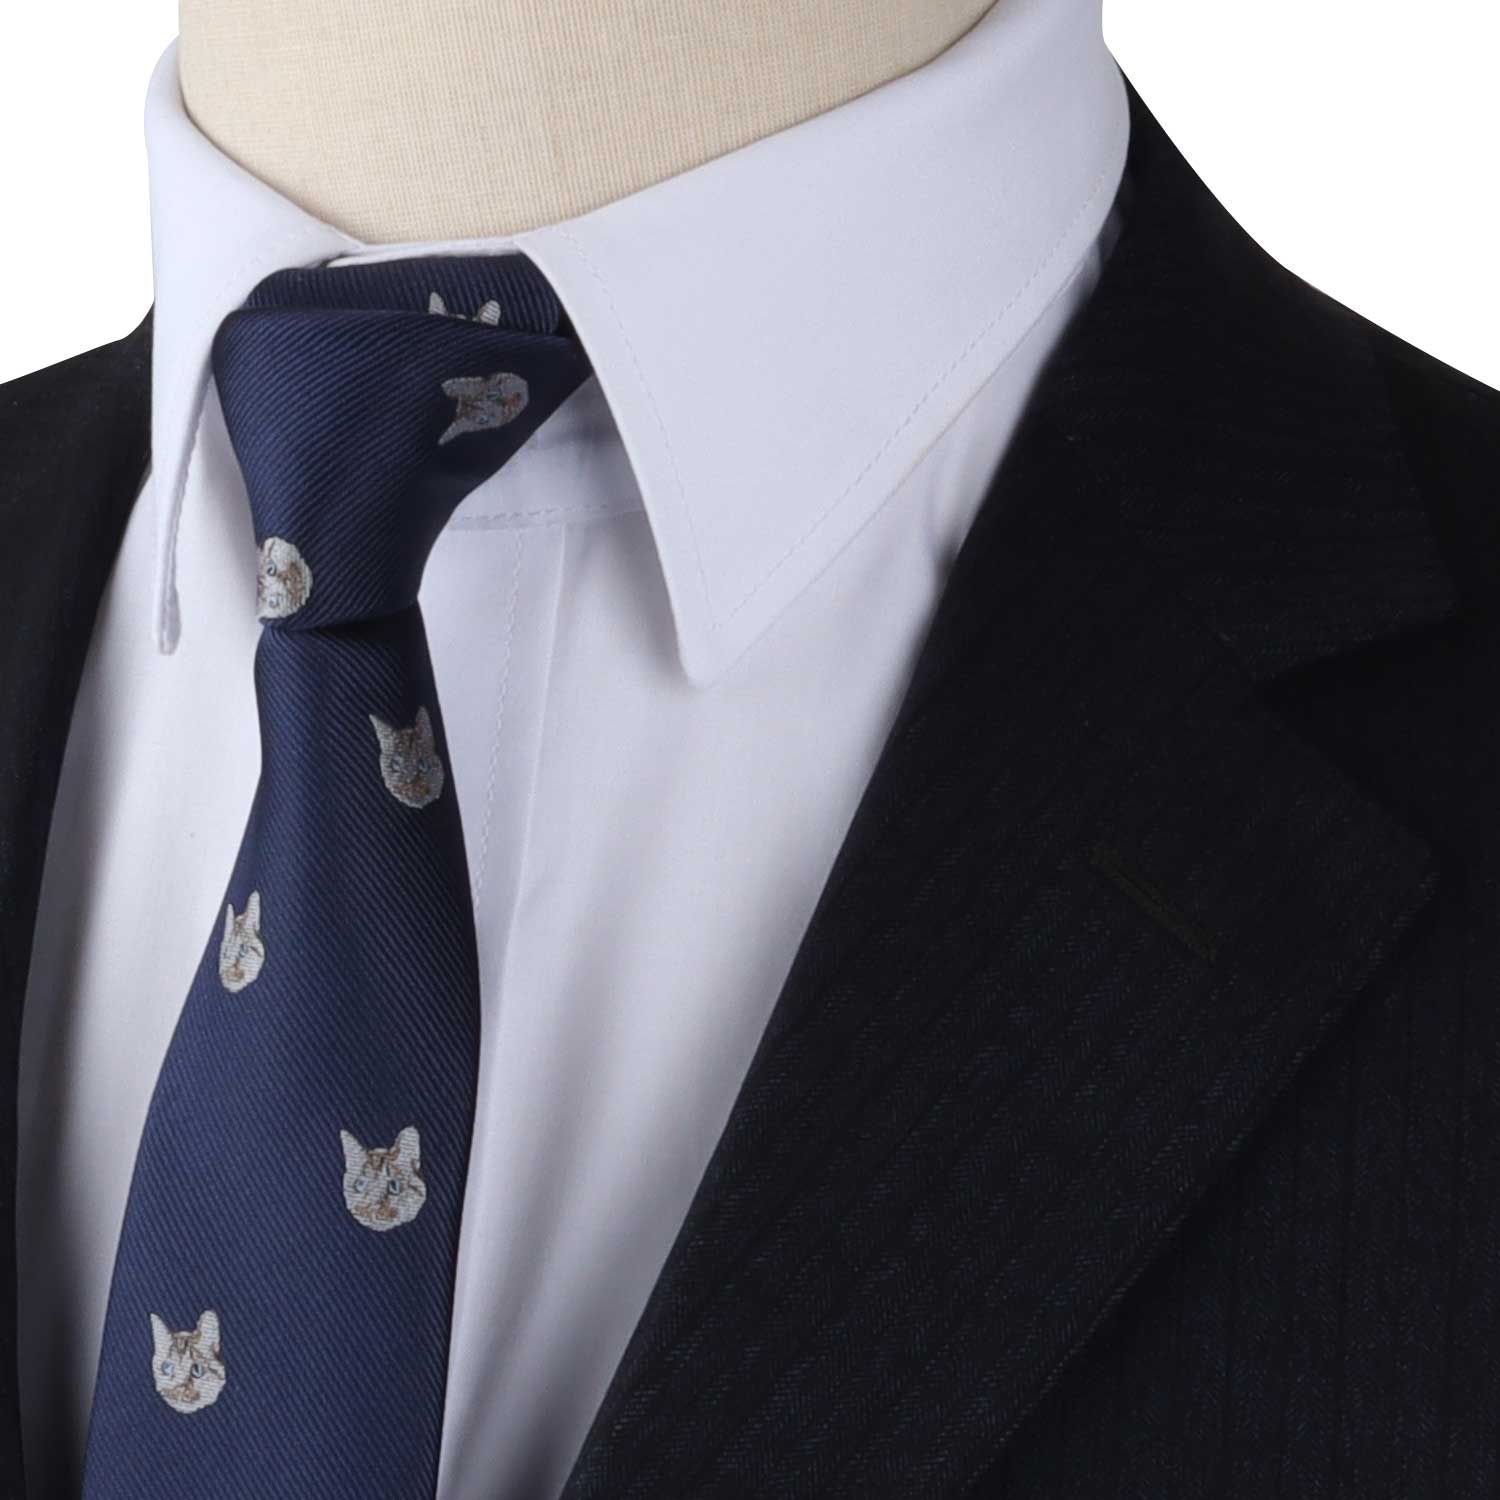 A mannequin wearing a Cat Skinny Tie blue suit and tie.